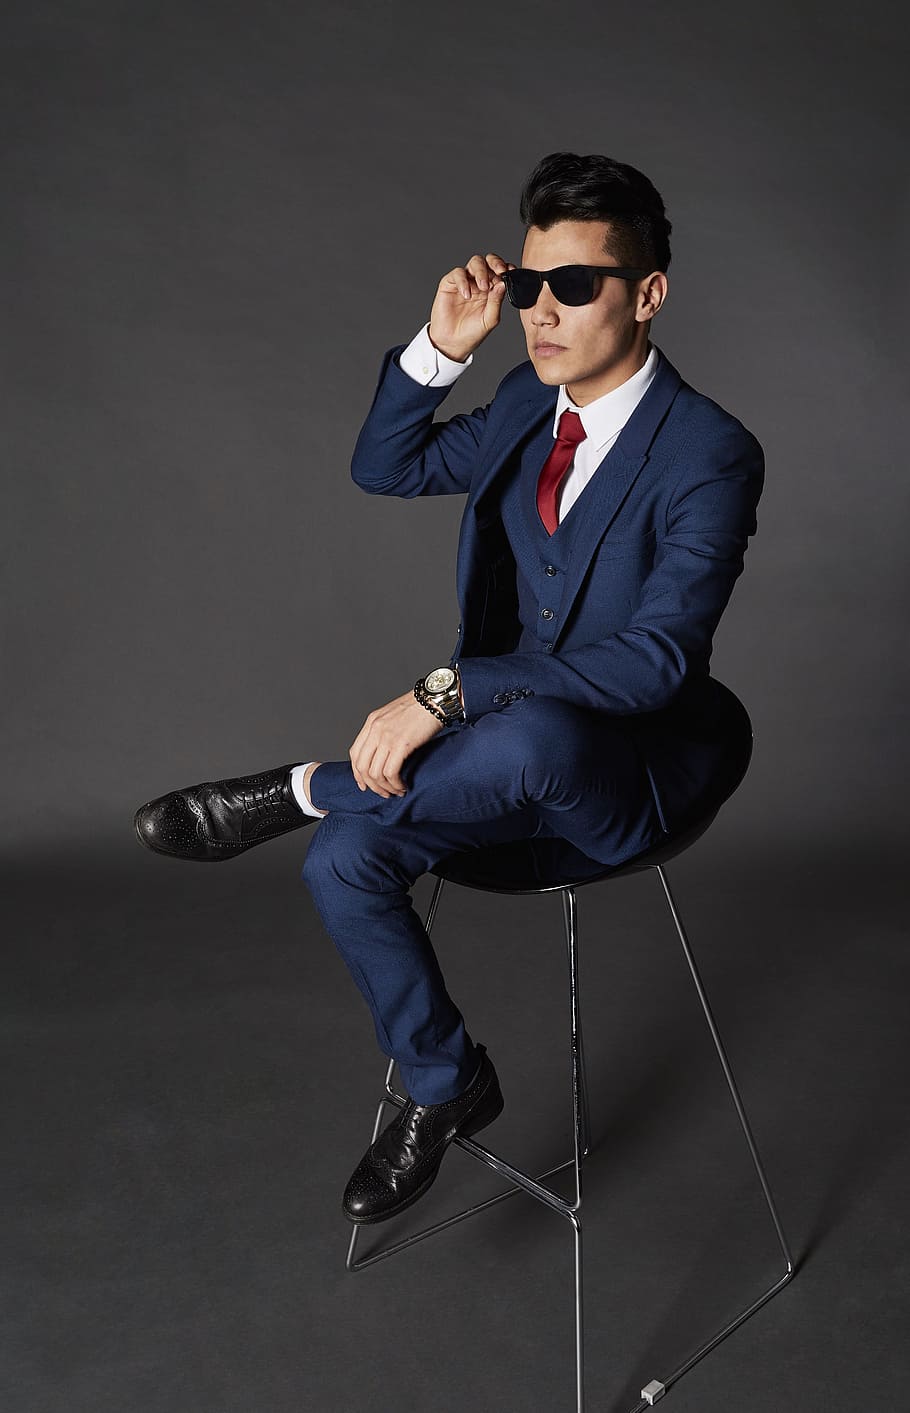 man sitting on chair while holding sunglasses, model, businessman